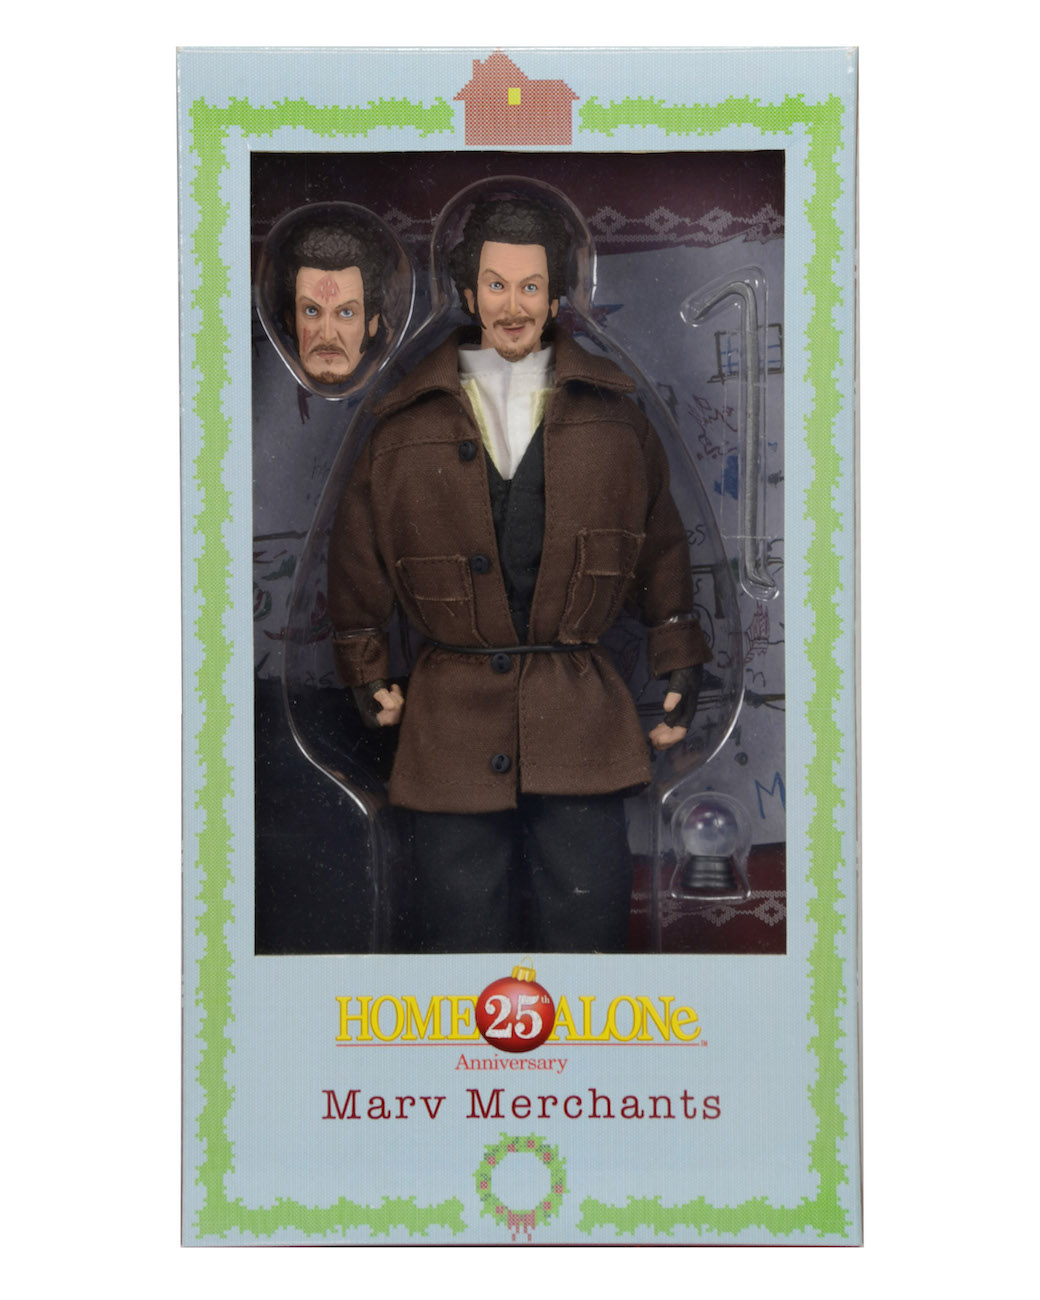 HOME ALONE CLOTHED MARV MERCHANT, RETRO STYLE ACTION FIGURE FROM NECA!